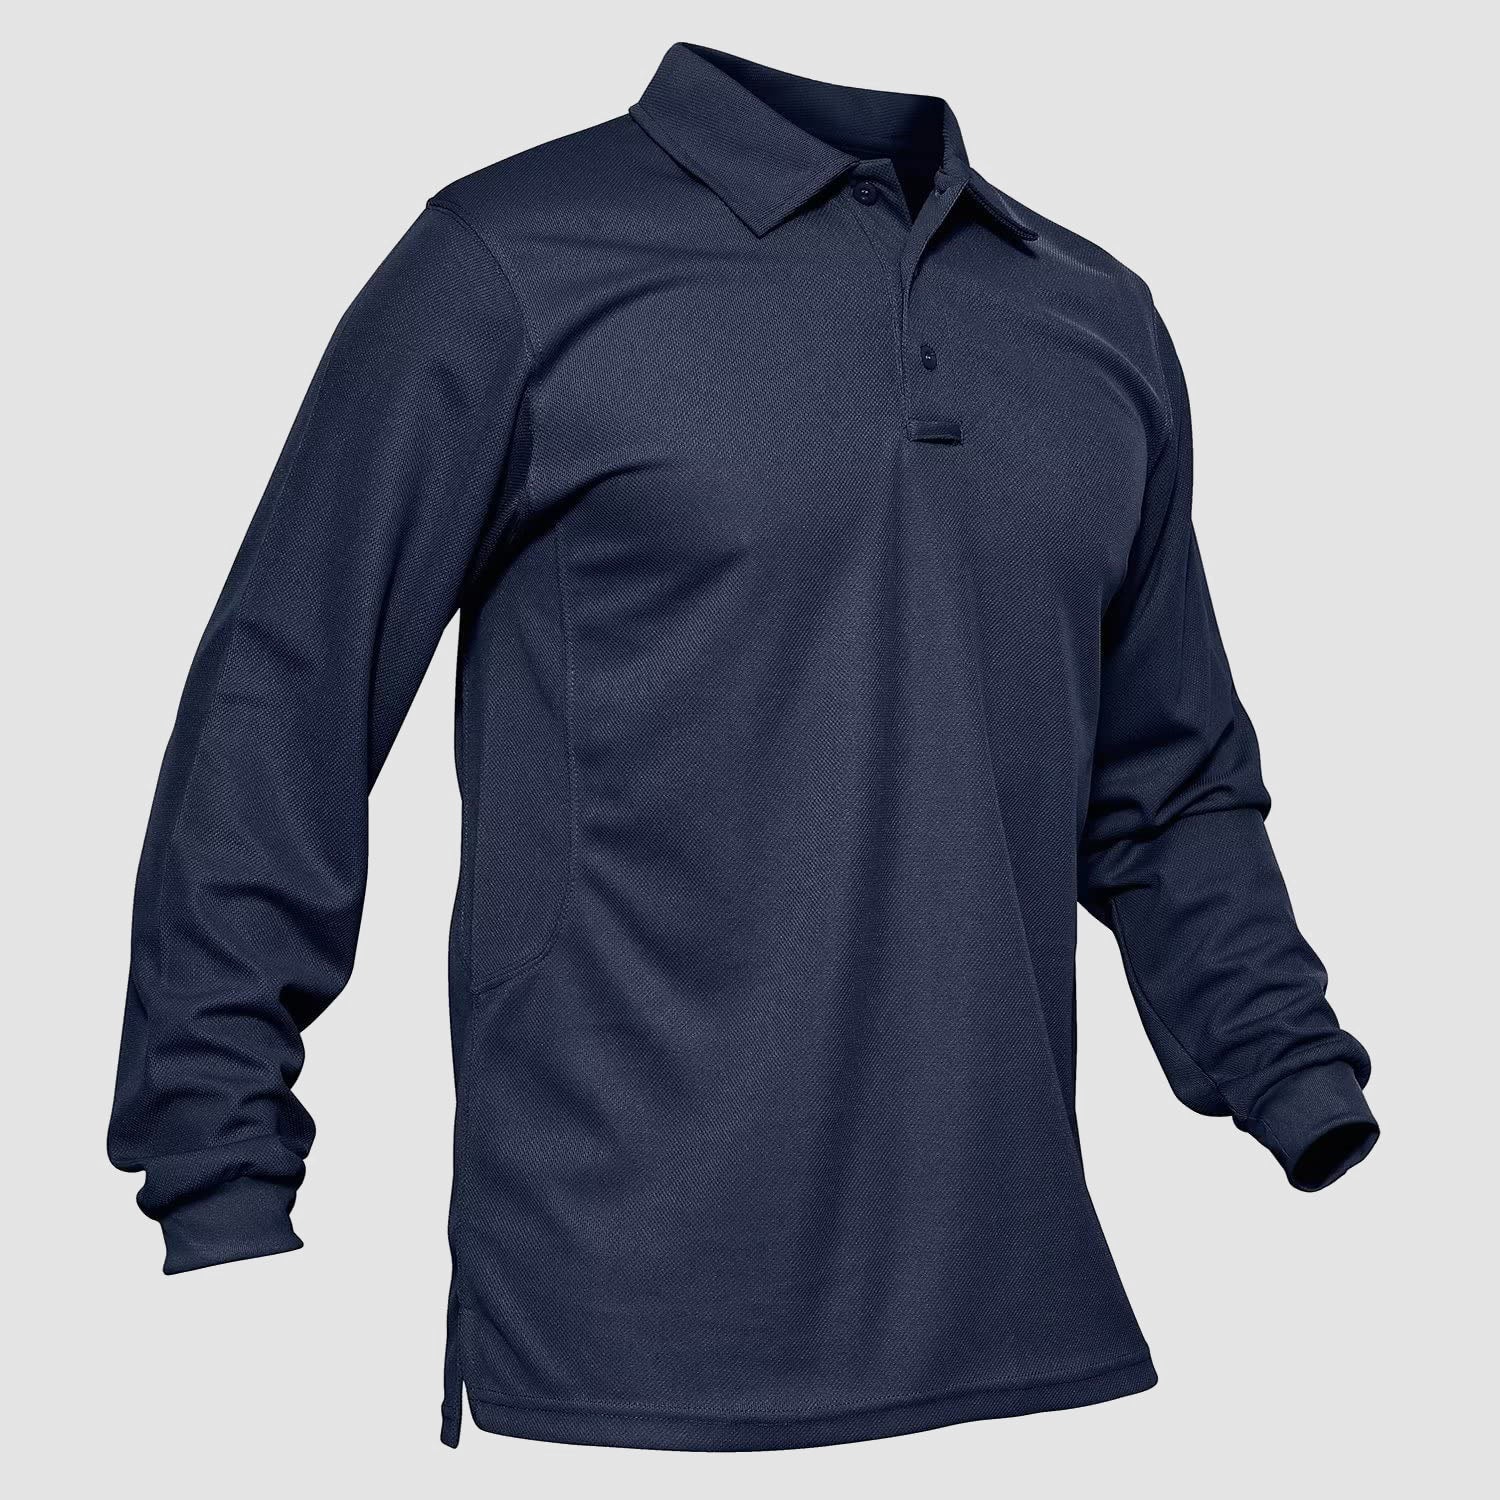 Men's Long-Sleeve Polo Shirt Quick Dry Breathable T-shirt